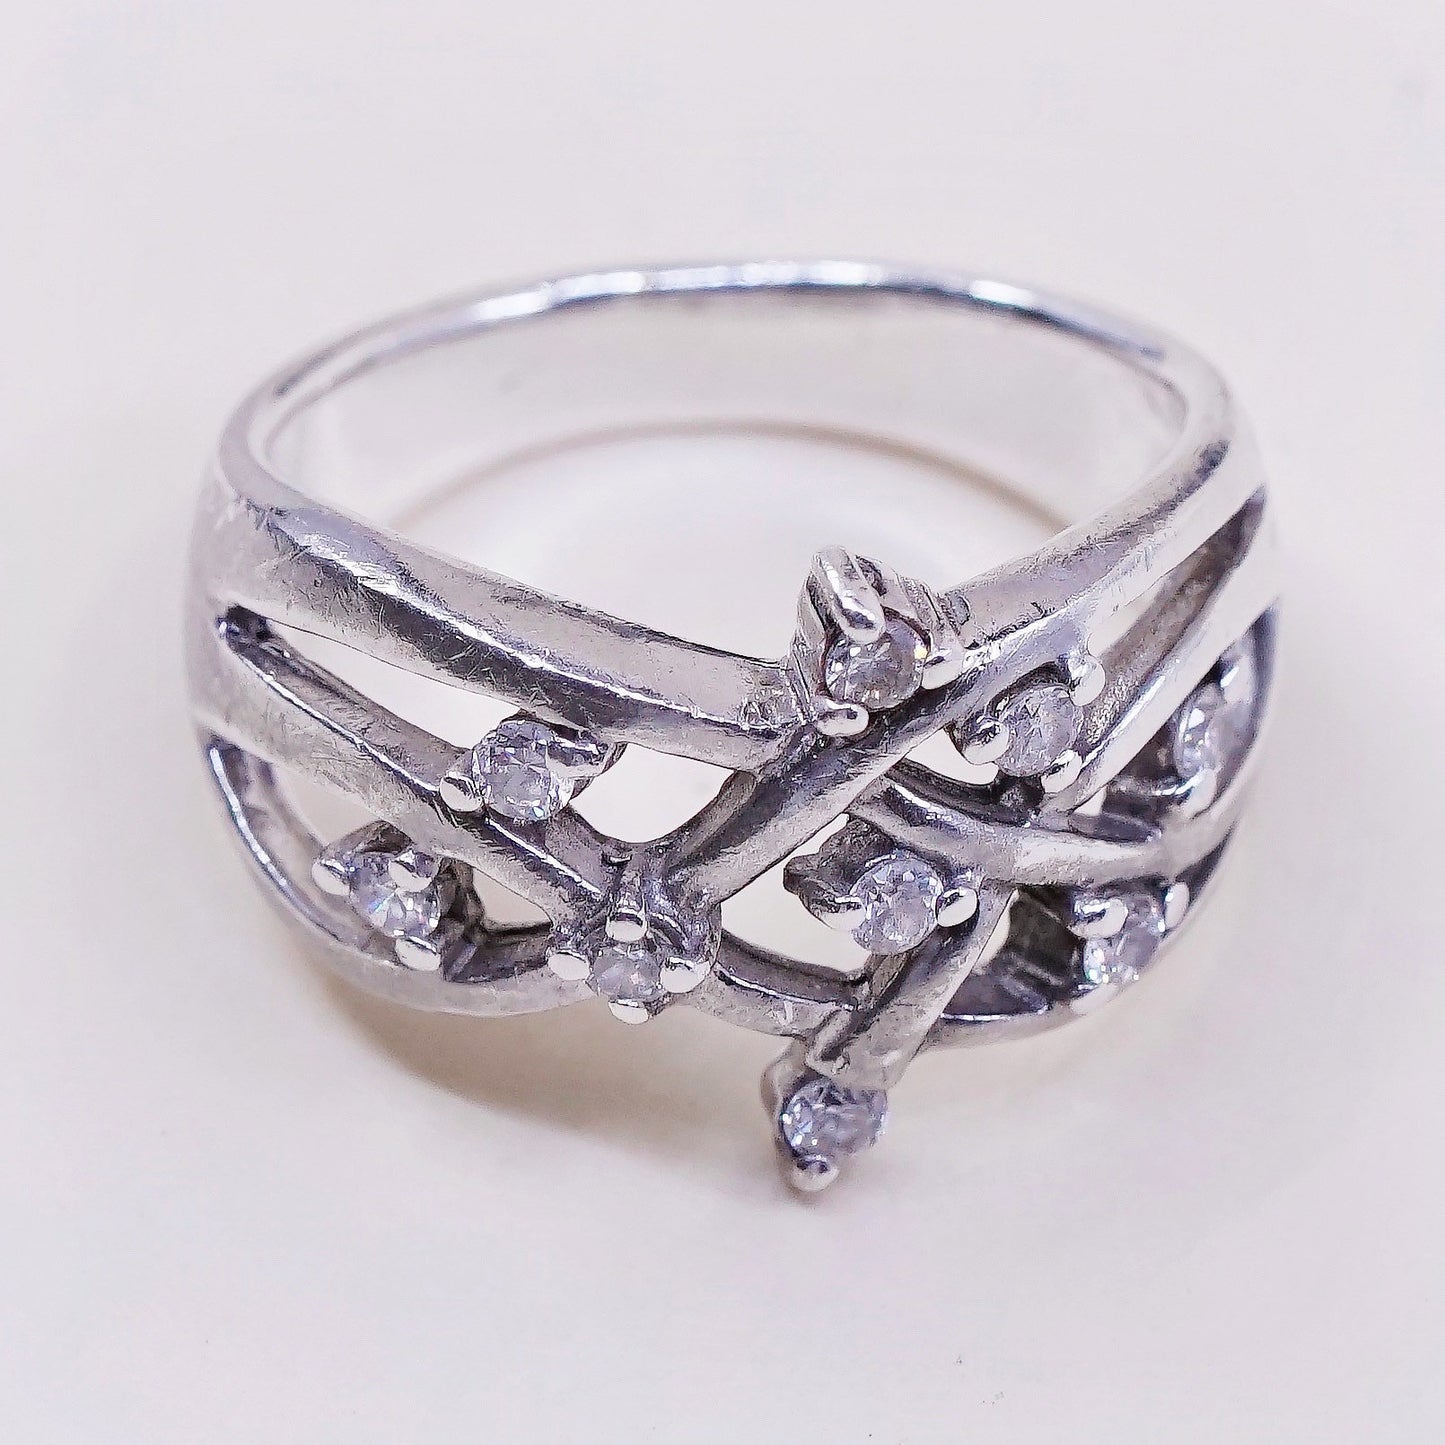 sz 7, vtg Sterling silver 925 ring, statement band with round CZ and filigree